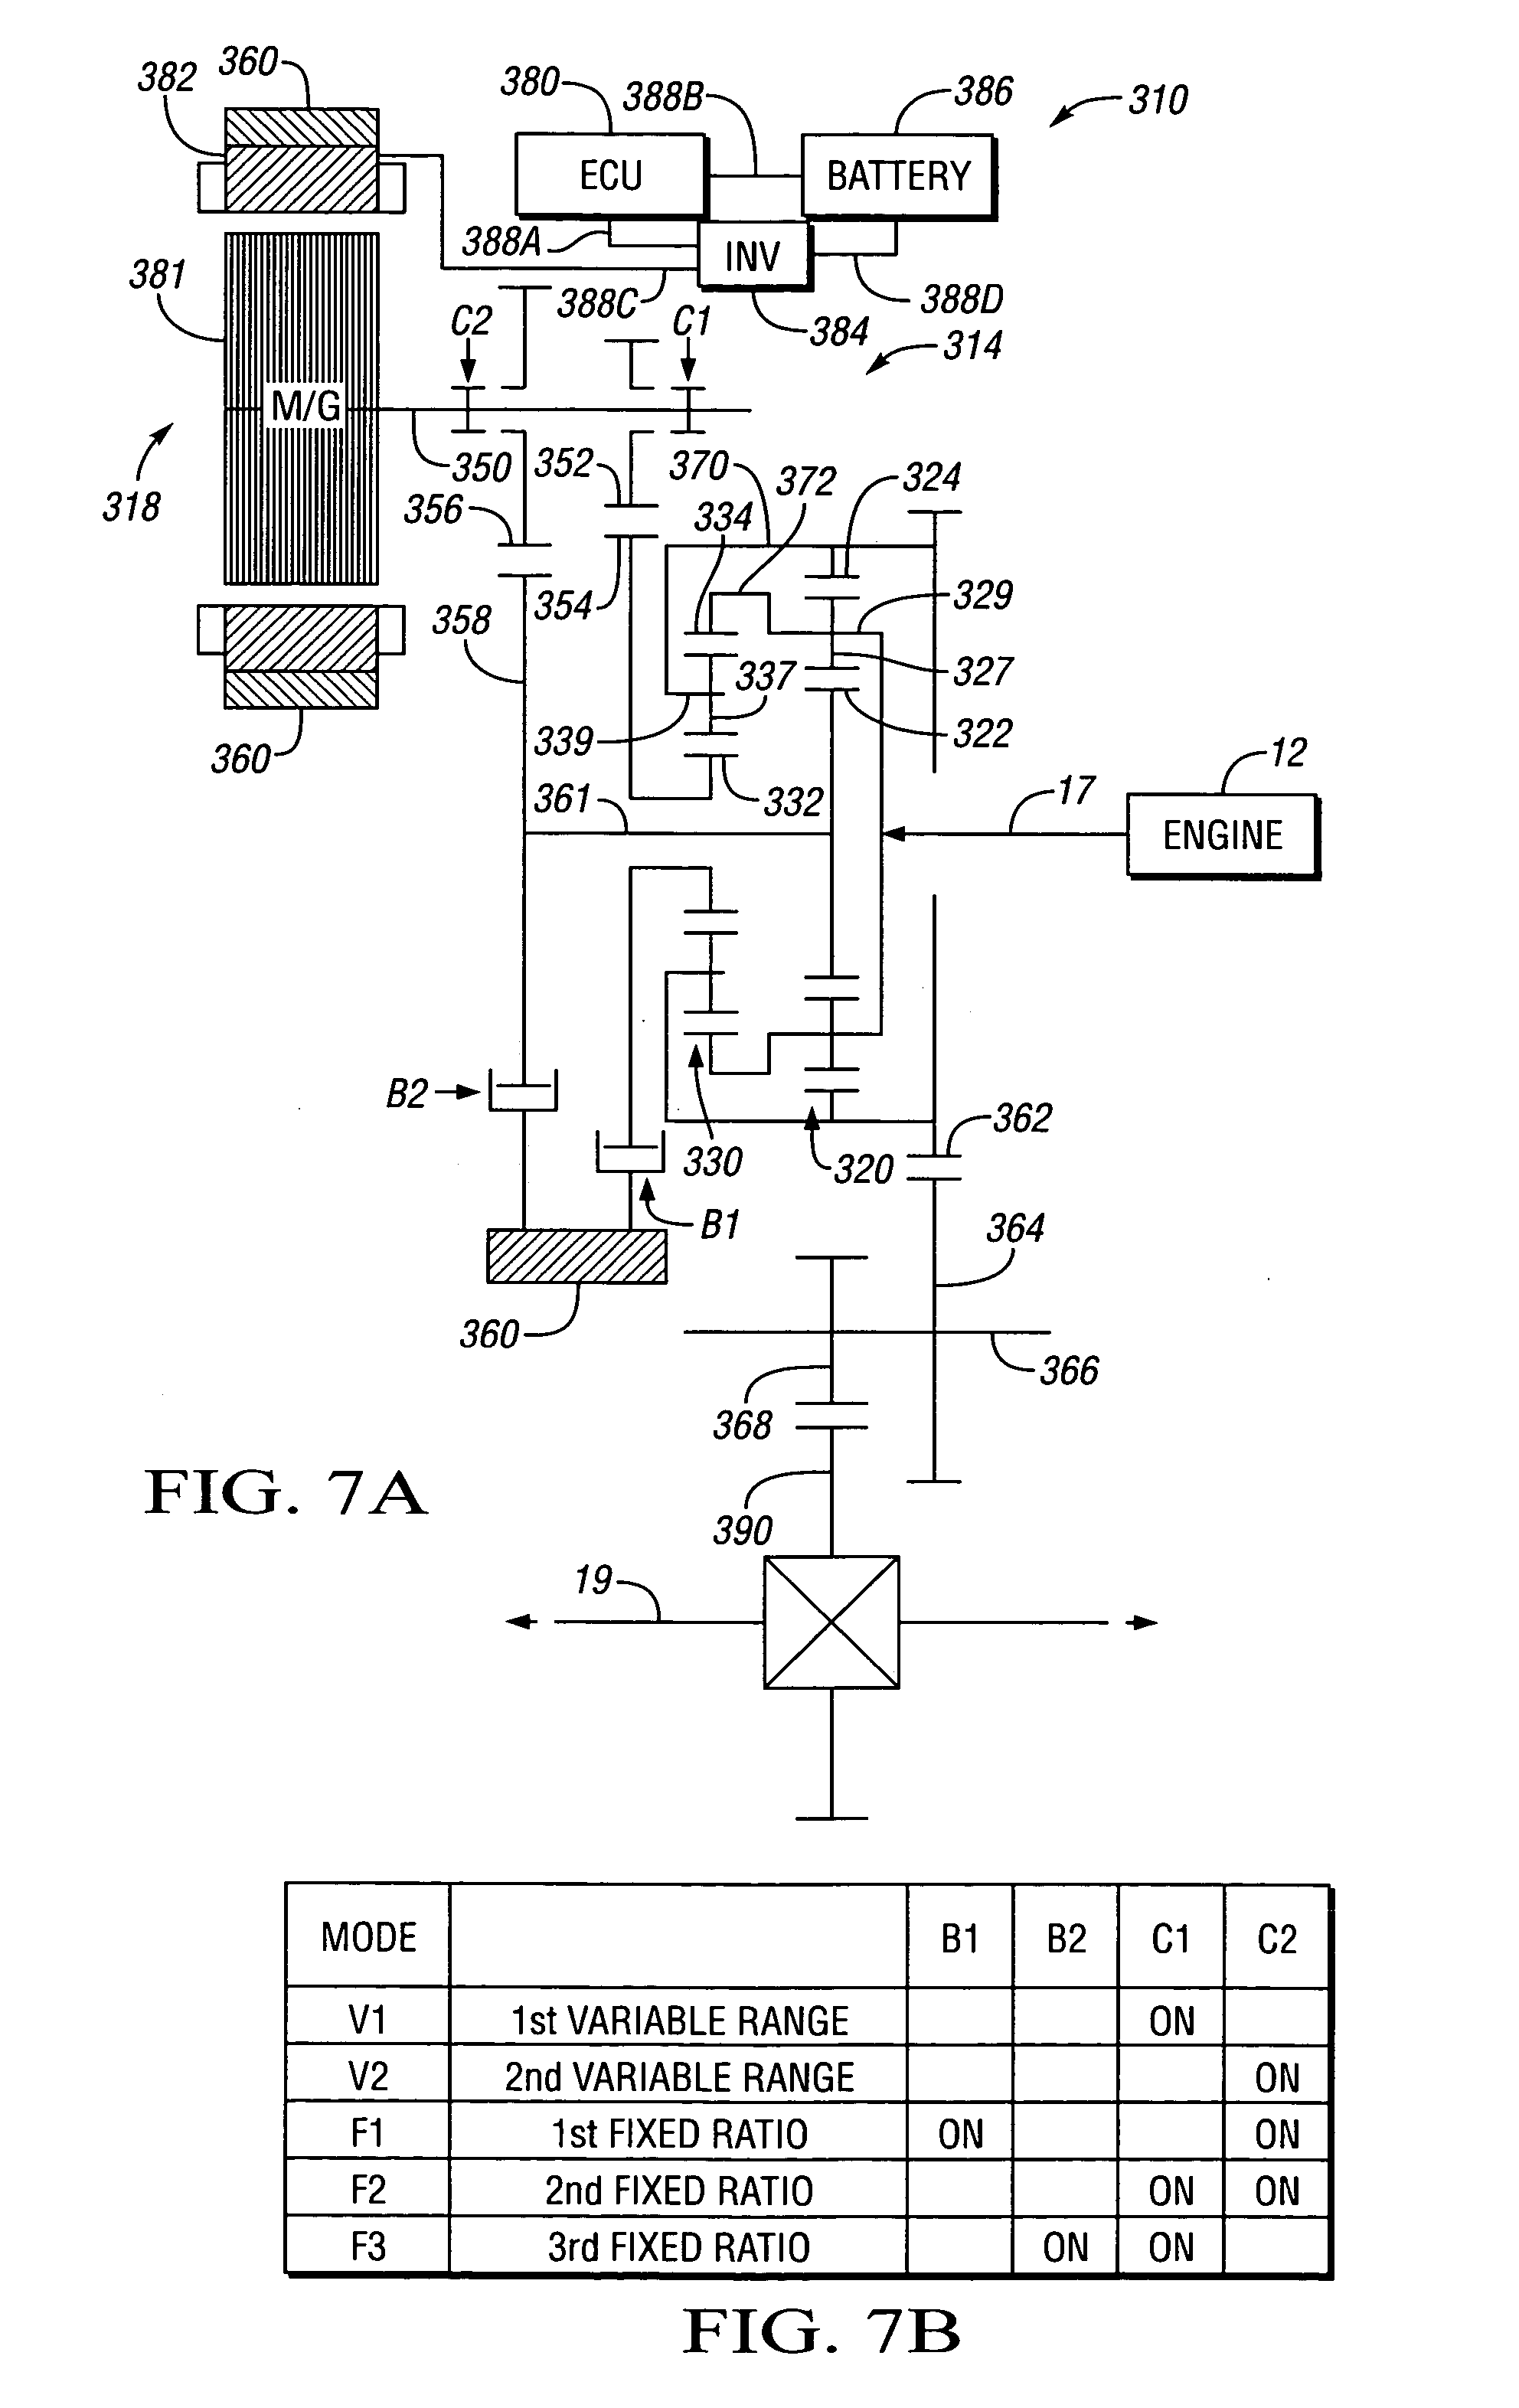 Hybrid electro-mechanical transmission with single motor/generator and method of control